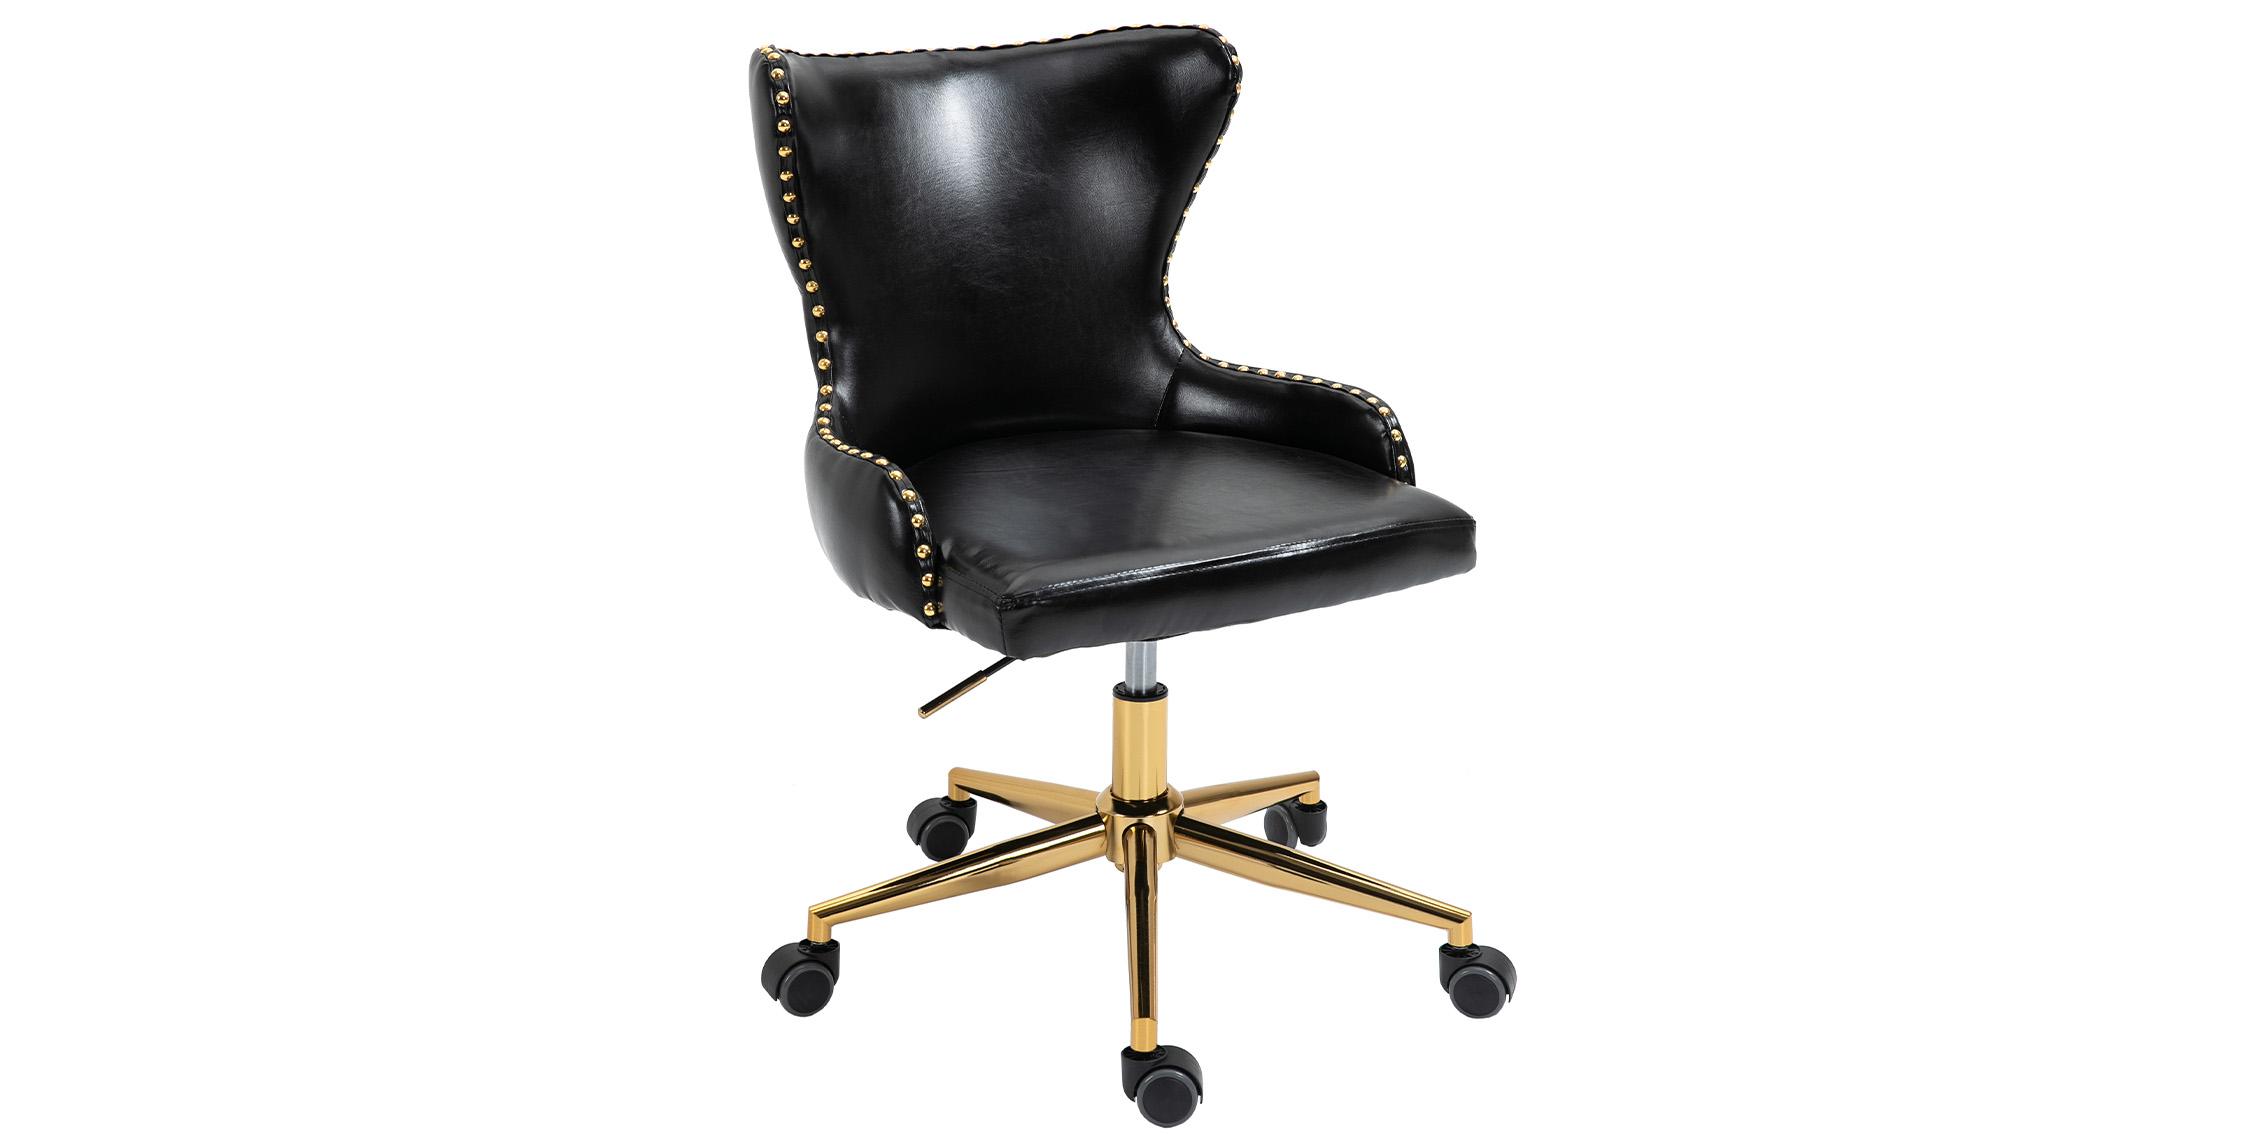 Contemporary, Modern Office Chair HENDRIX 167Black 167Black in Gold, Black Faux Leather